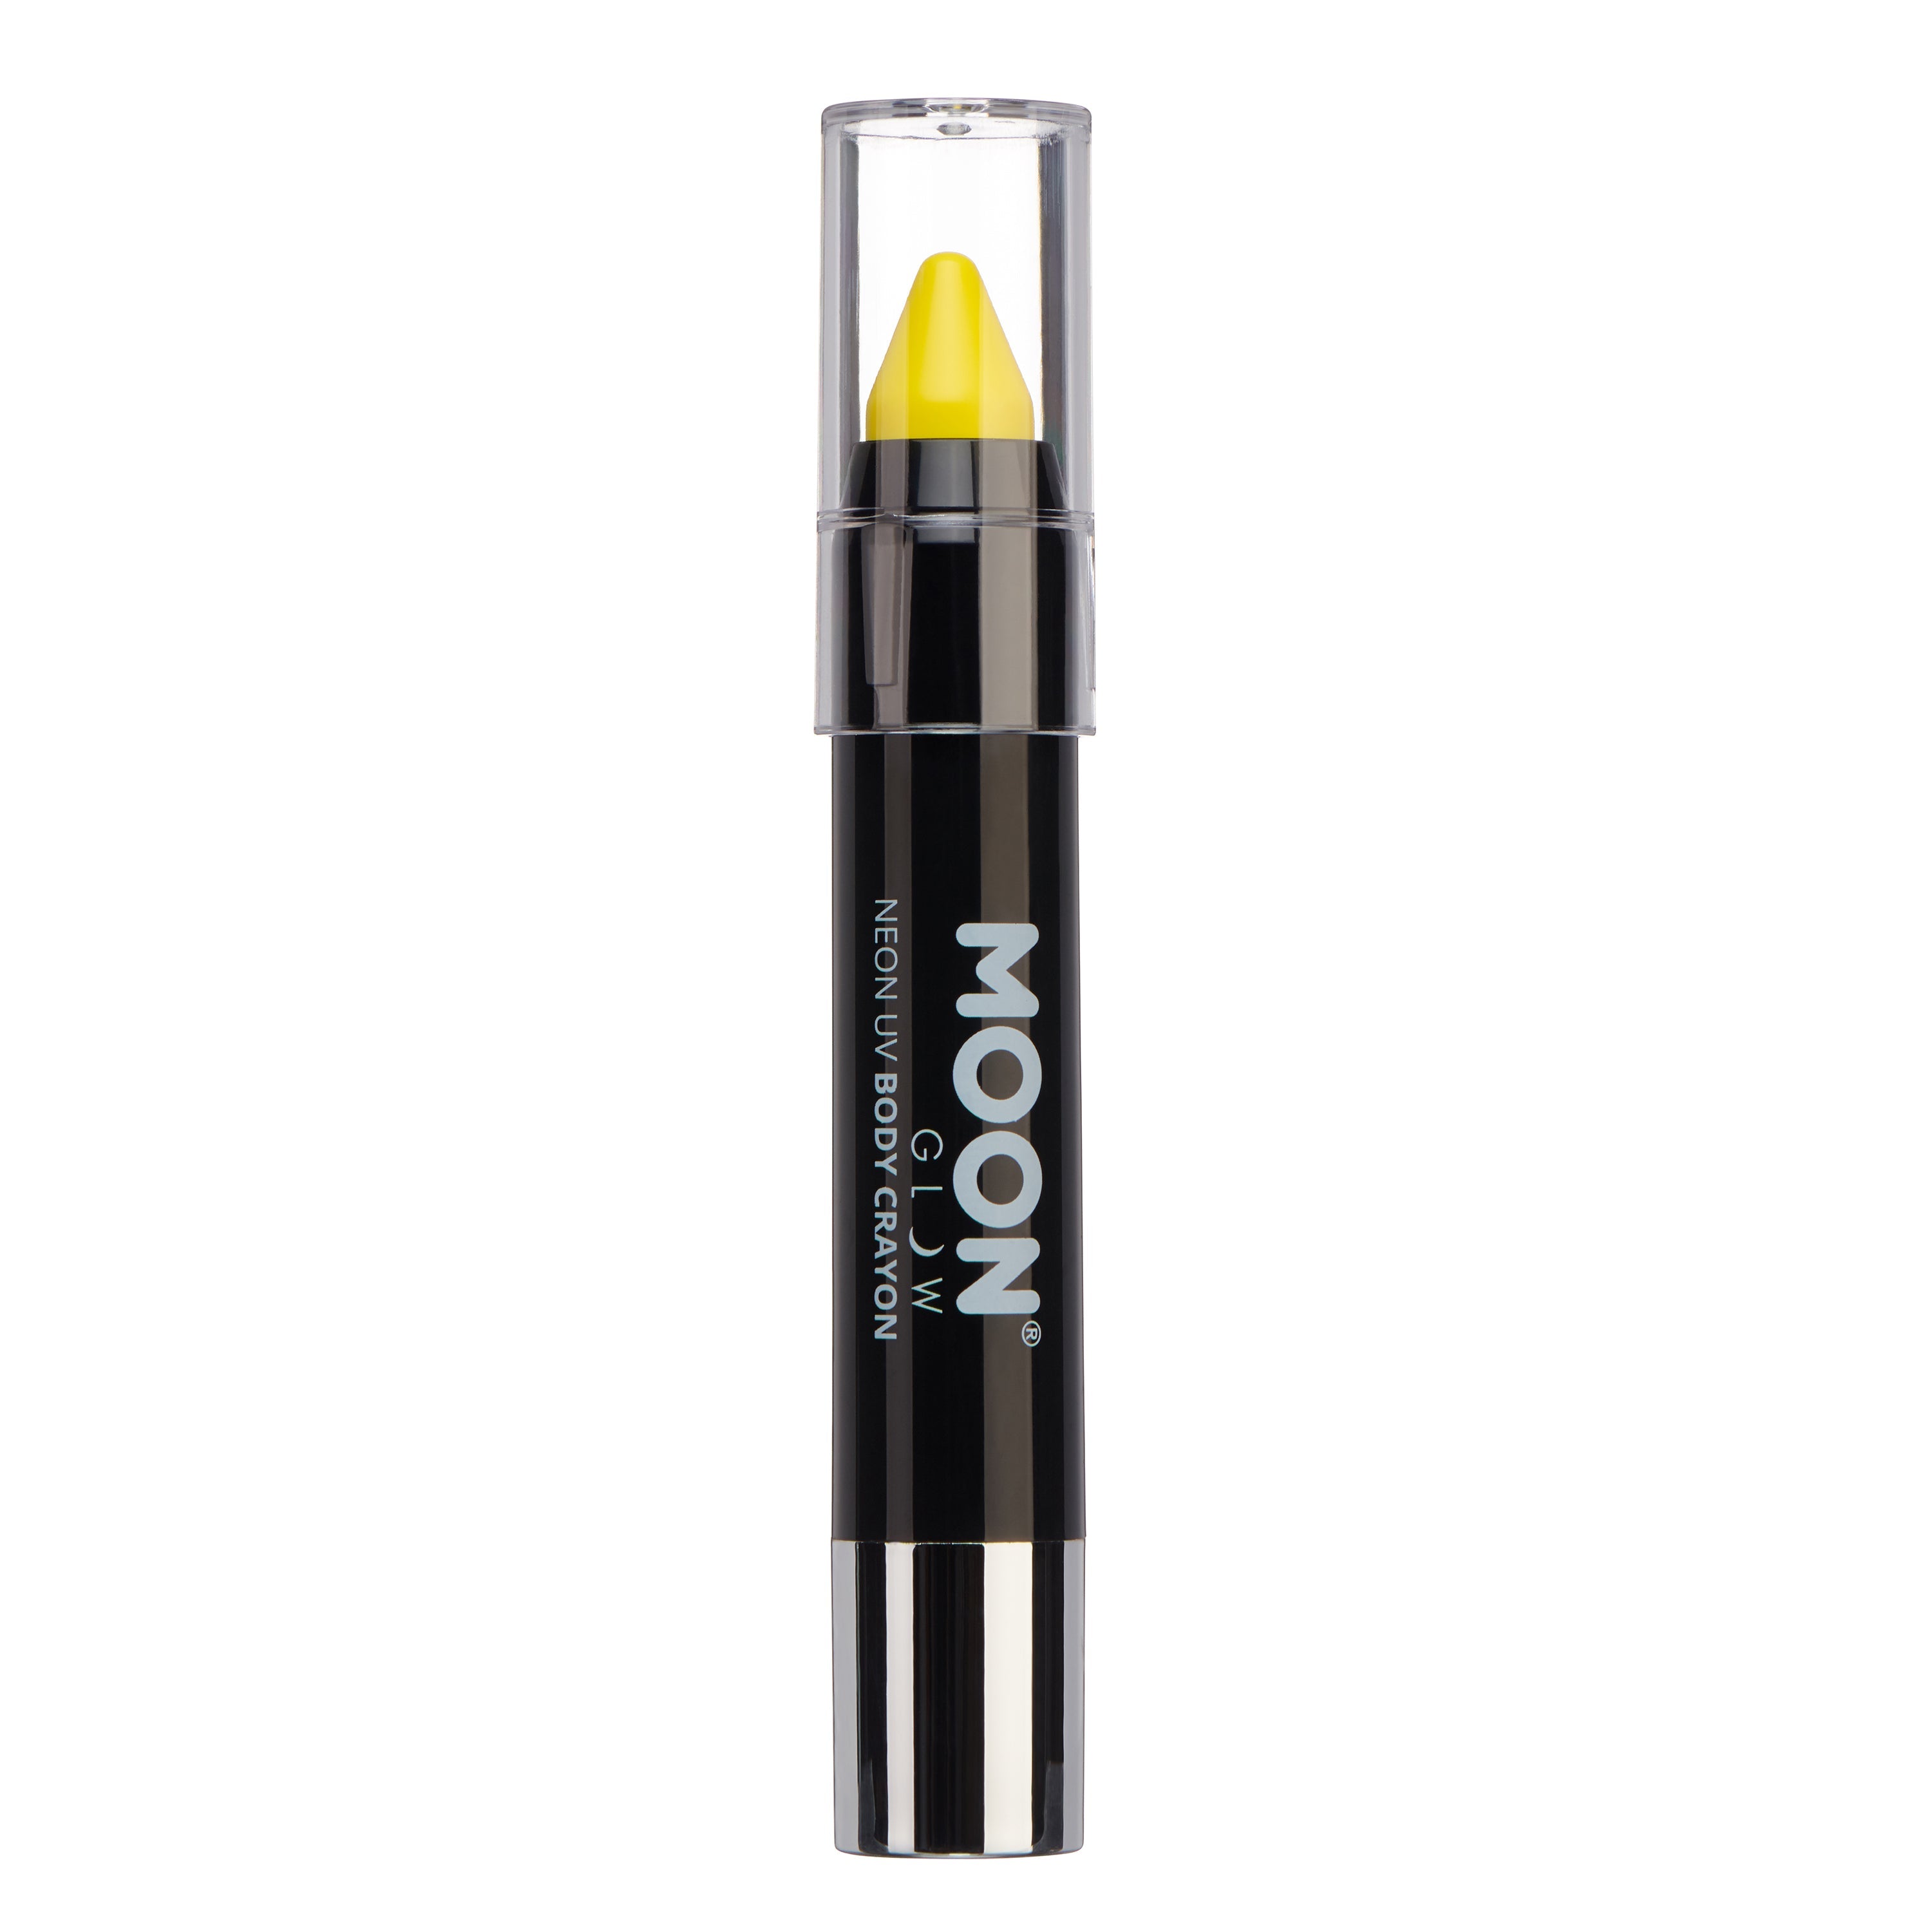 Intense Yellow - Neon UV Glow Blacklight Face & Body Crayon, 3.5g. Cosmetically certified, FDA & Health Canada compliant and cruelty free.